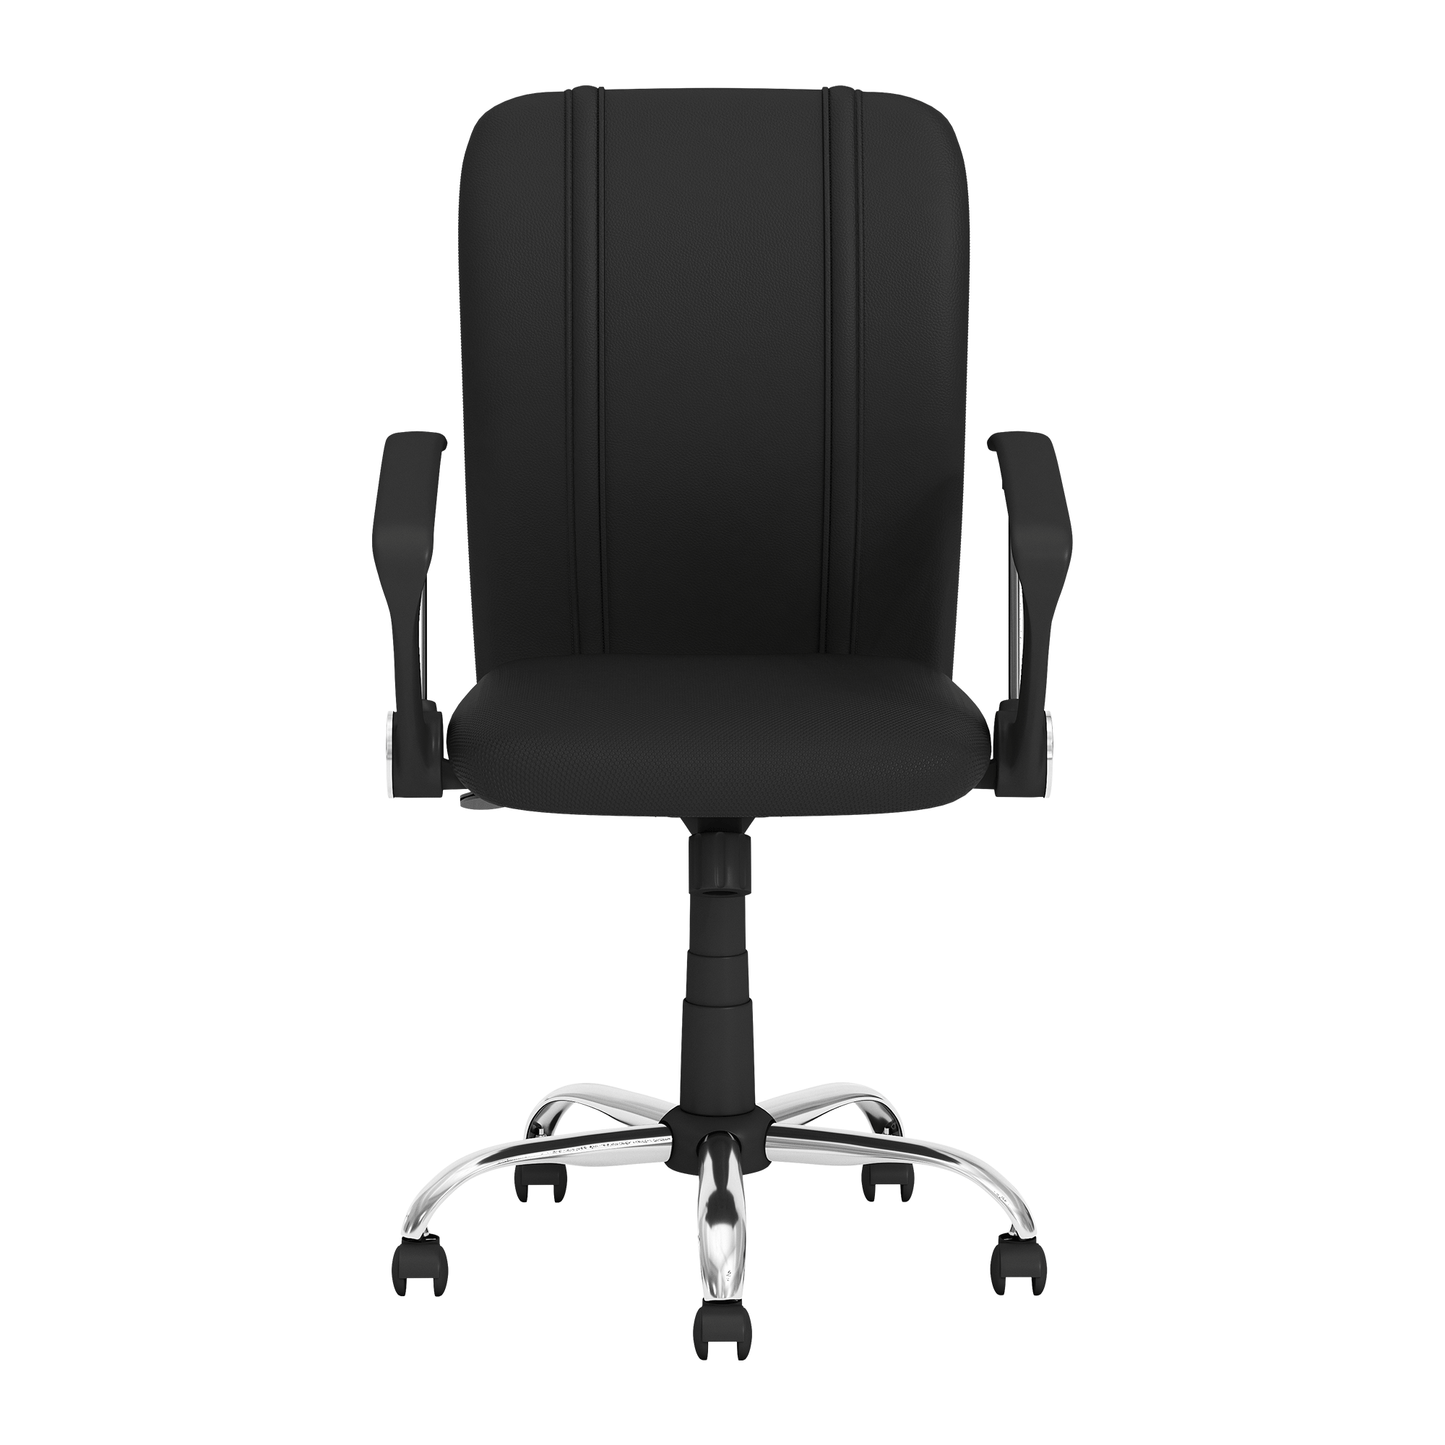 Curve Task Chair with Chevrolet Primary Logo